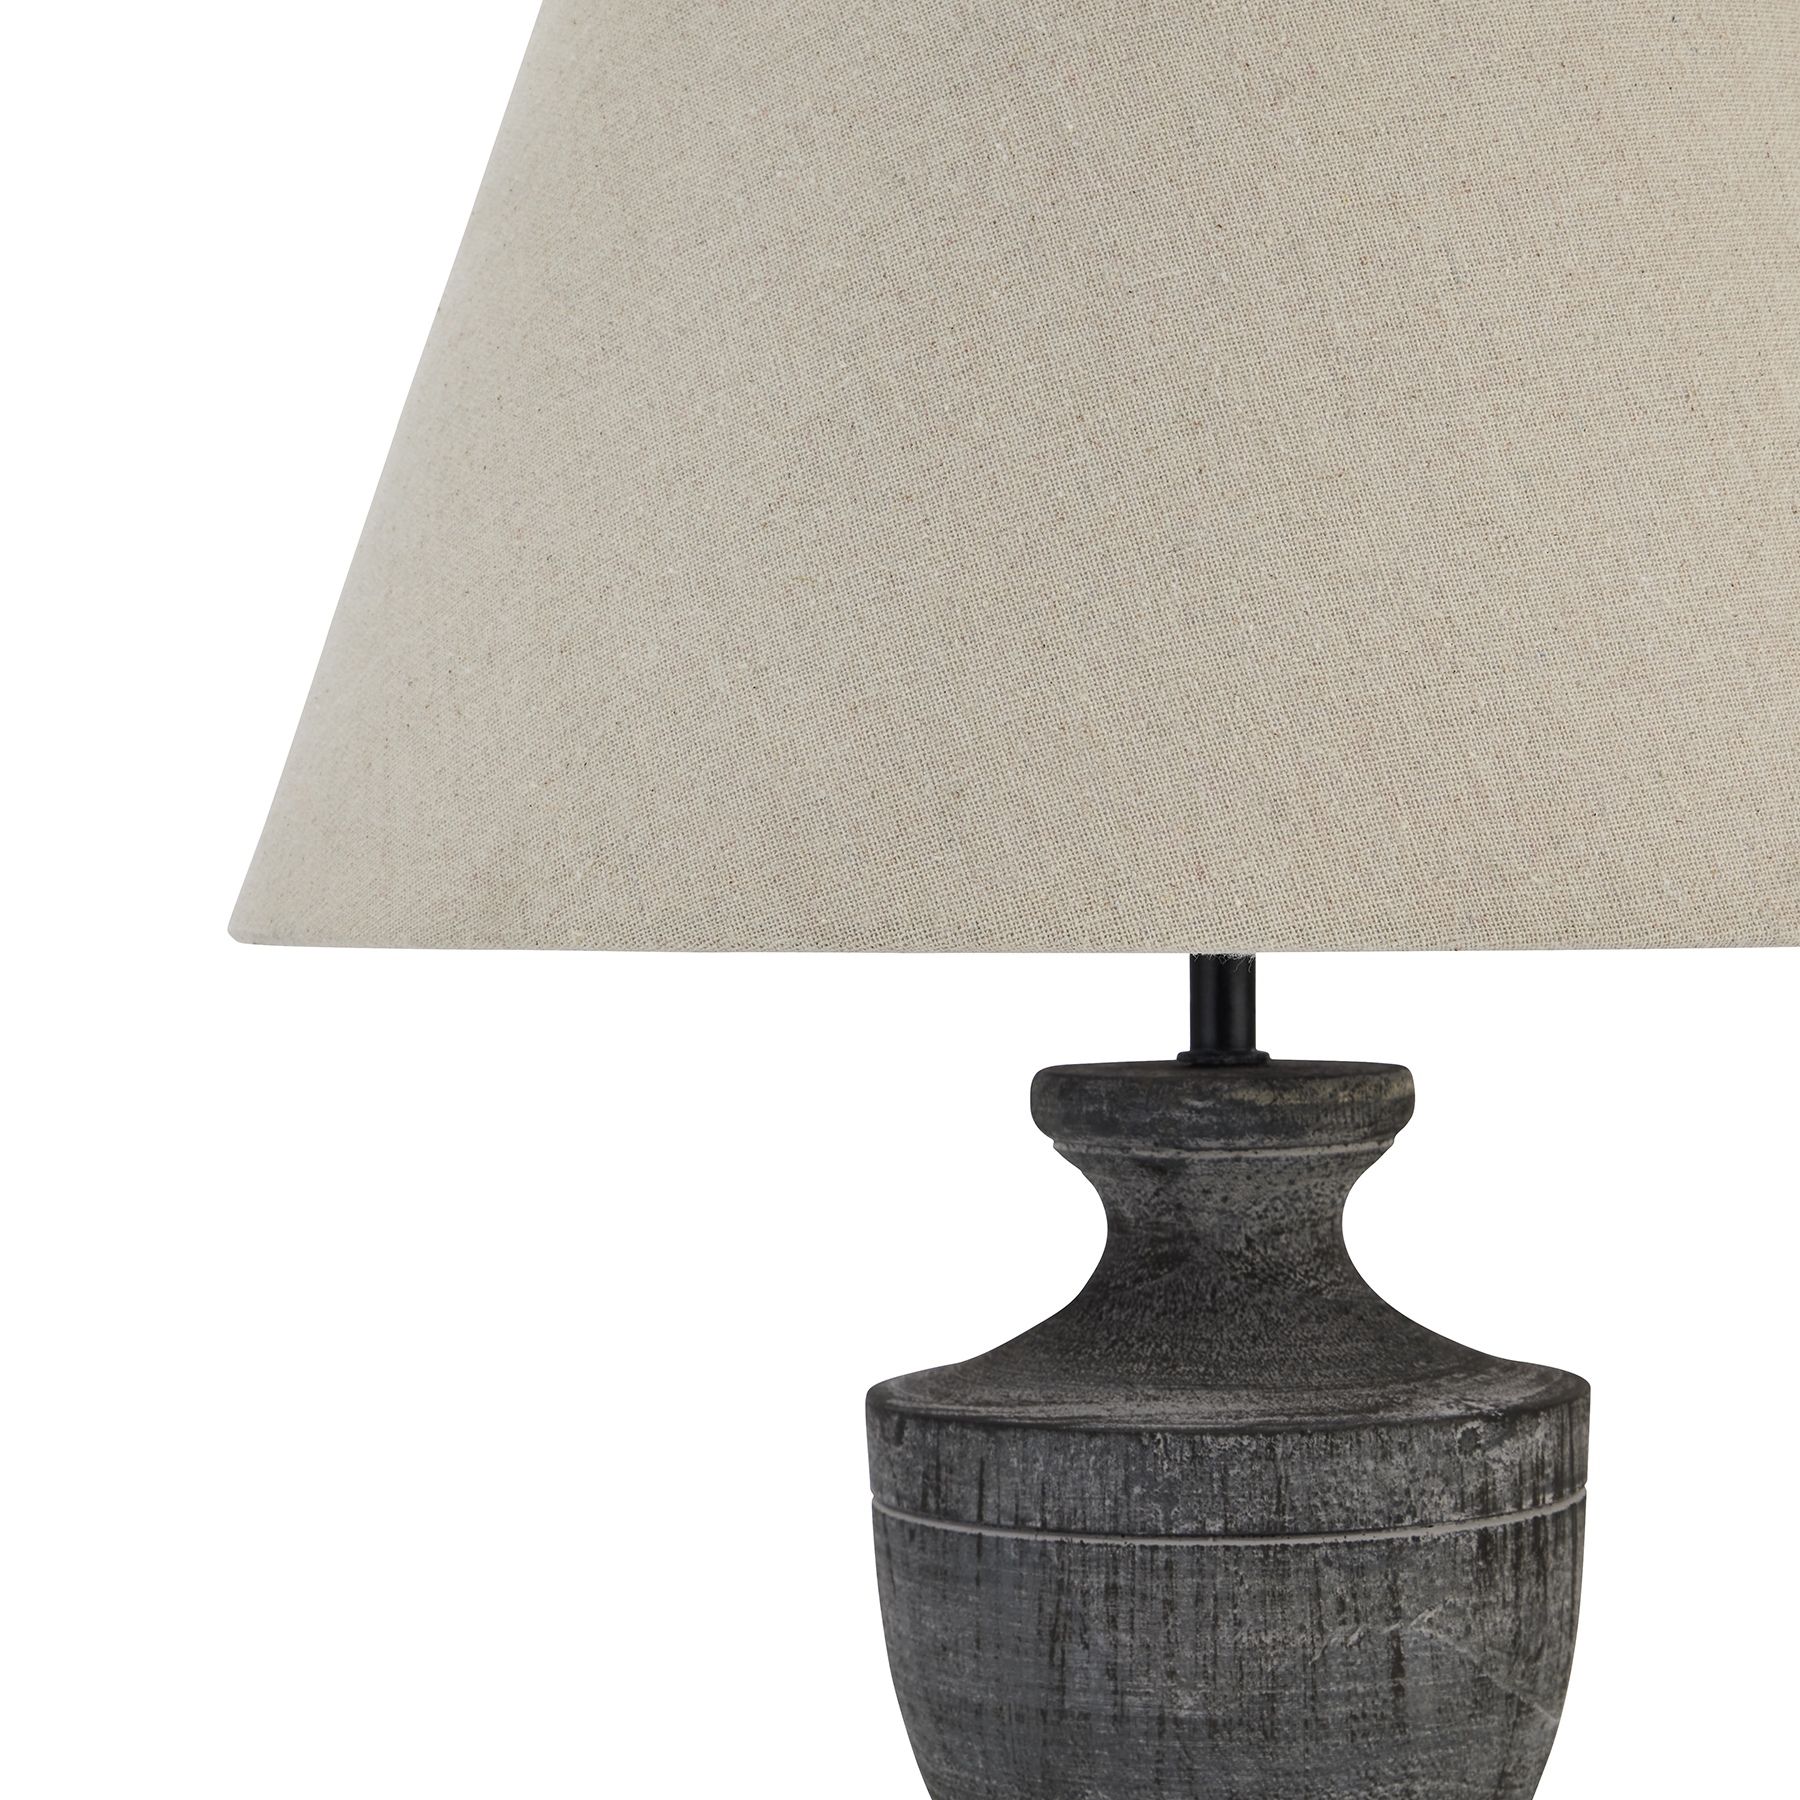 Incia Urn Wooden Table Lamp - Image 3